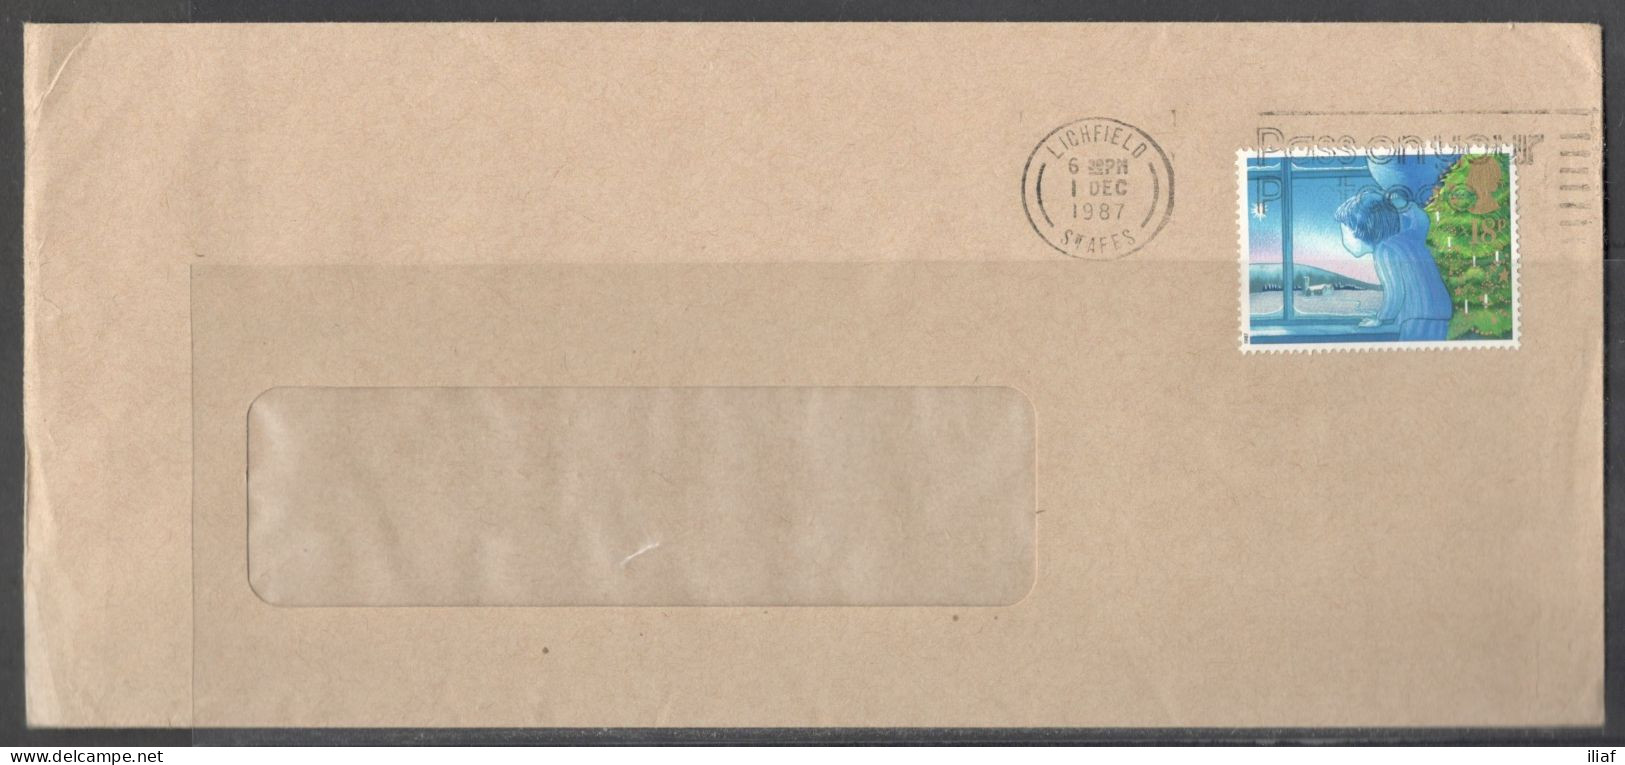 Great Britain - United Kingdom. Stamp Sc. 1197 On Letter, Sent From Lichfield On 1.12.87 - Cartas & Documentos